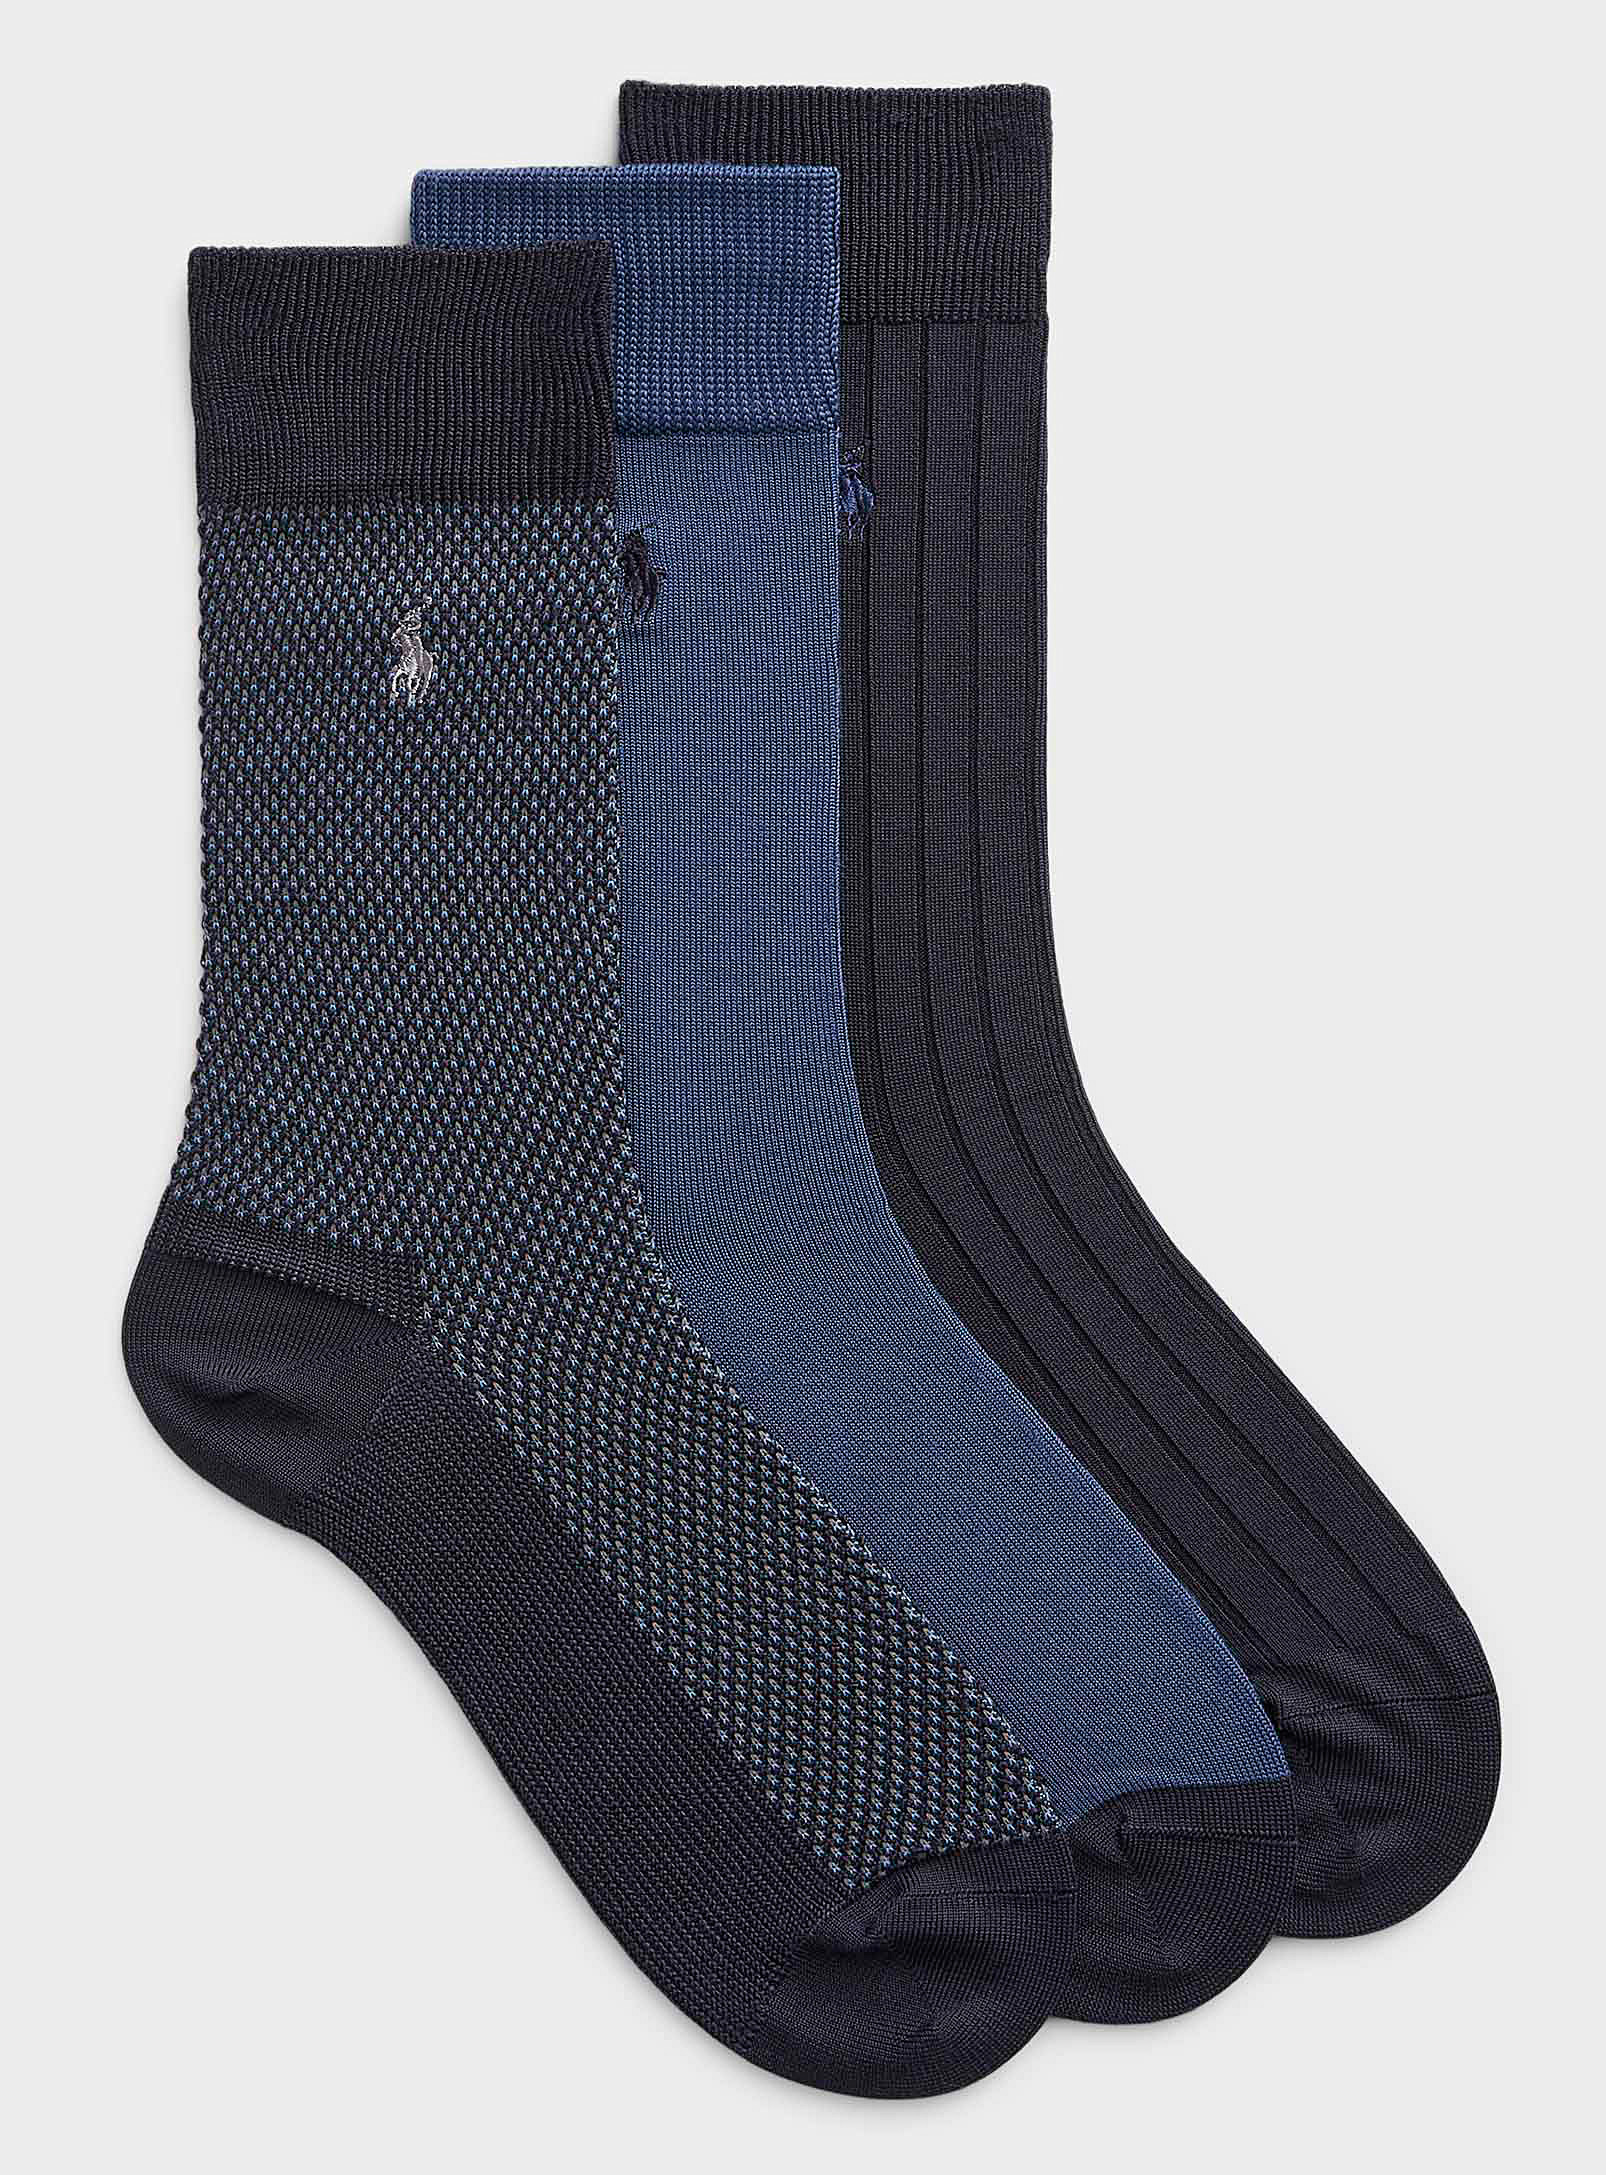 Polo Ralph Lauren - Men's Solid and patterned blue dress socks 3-pack